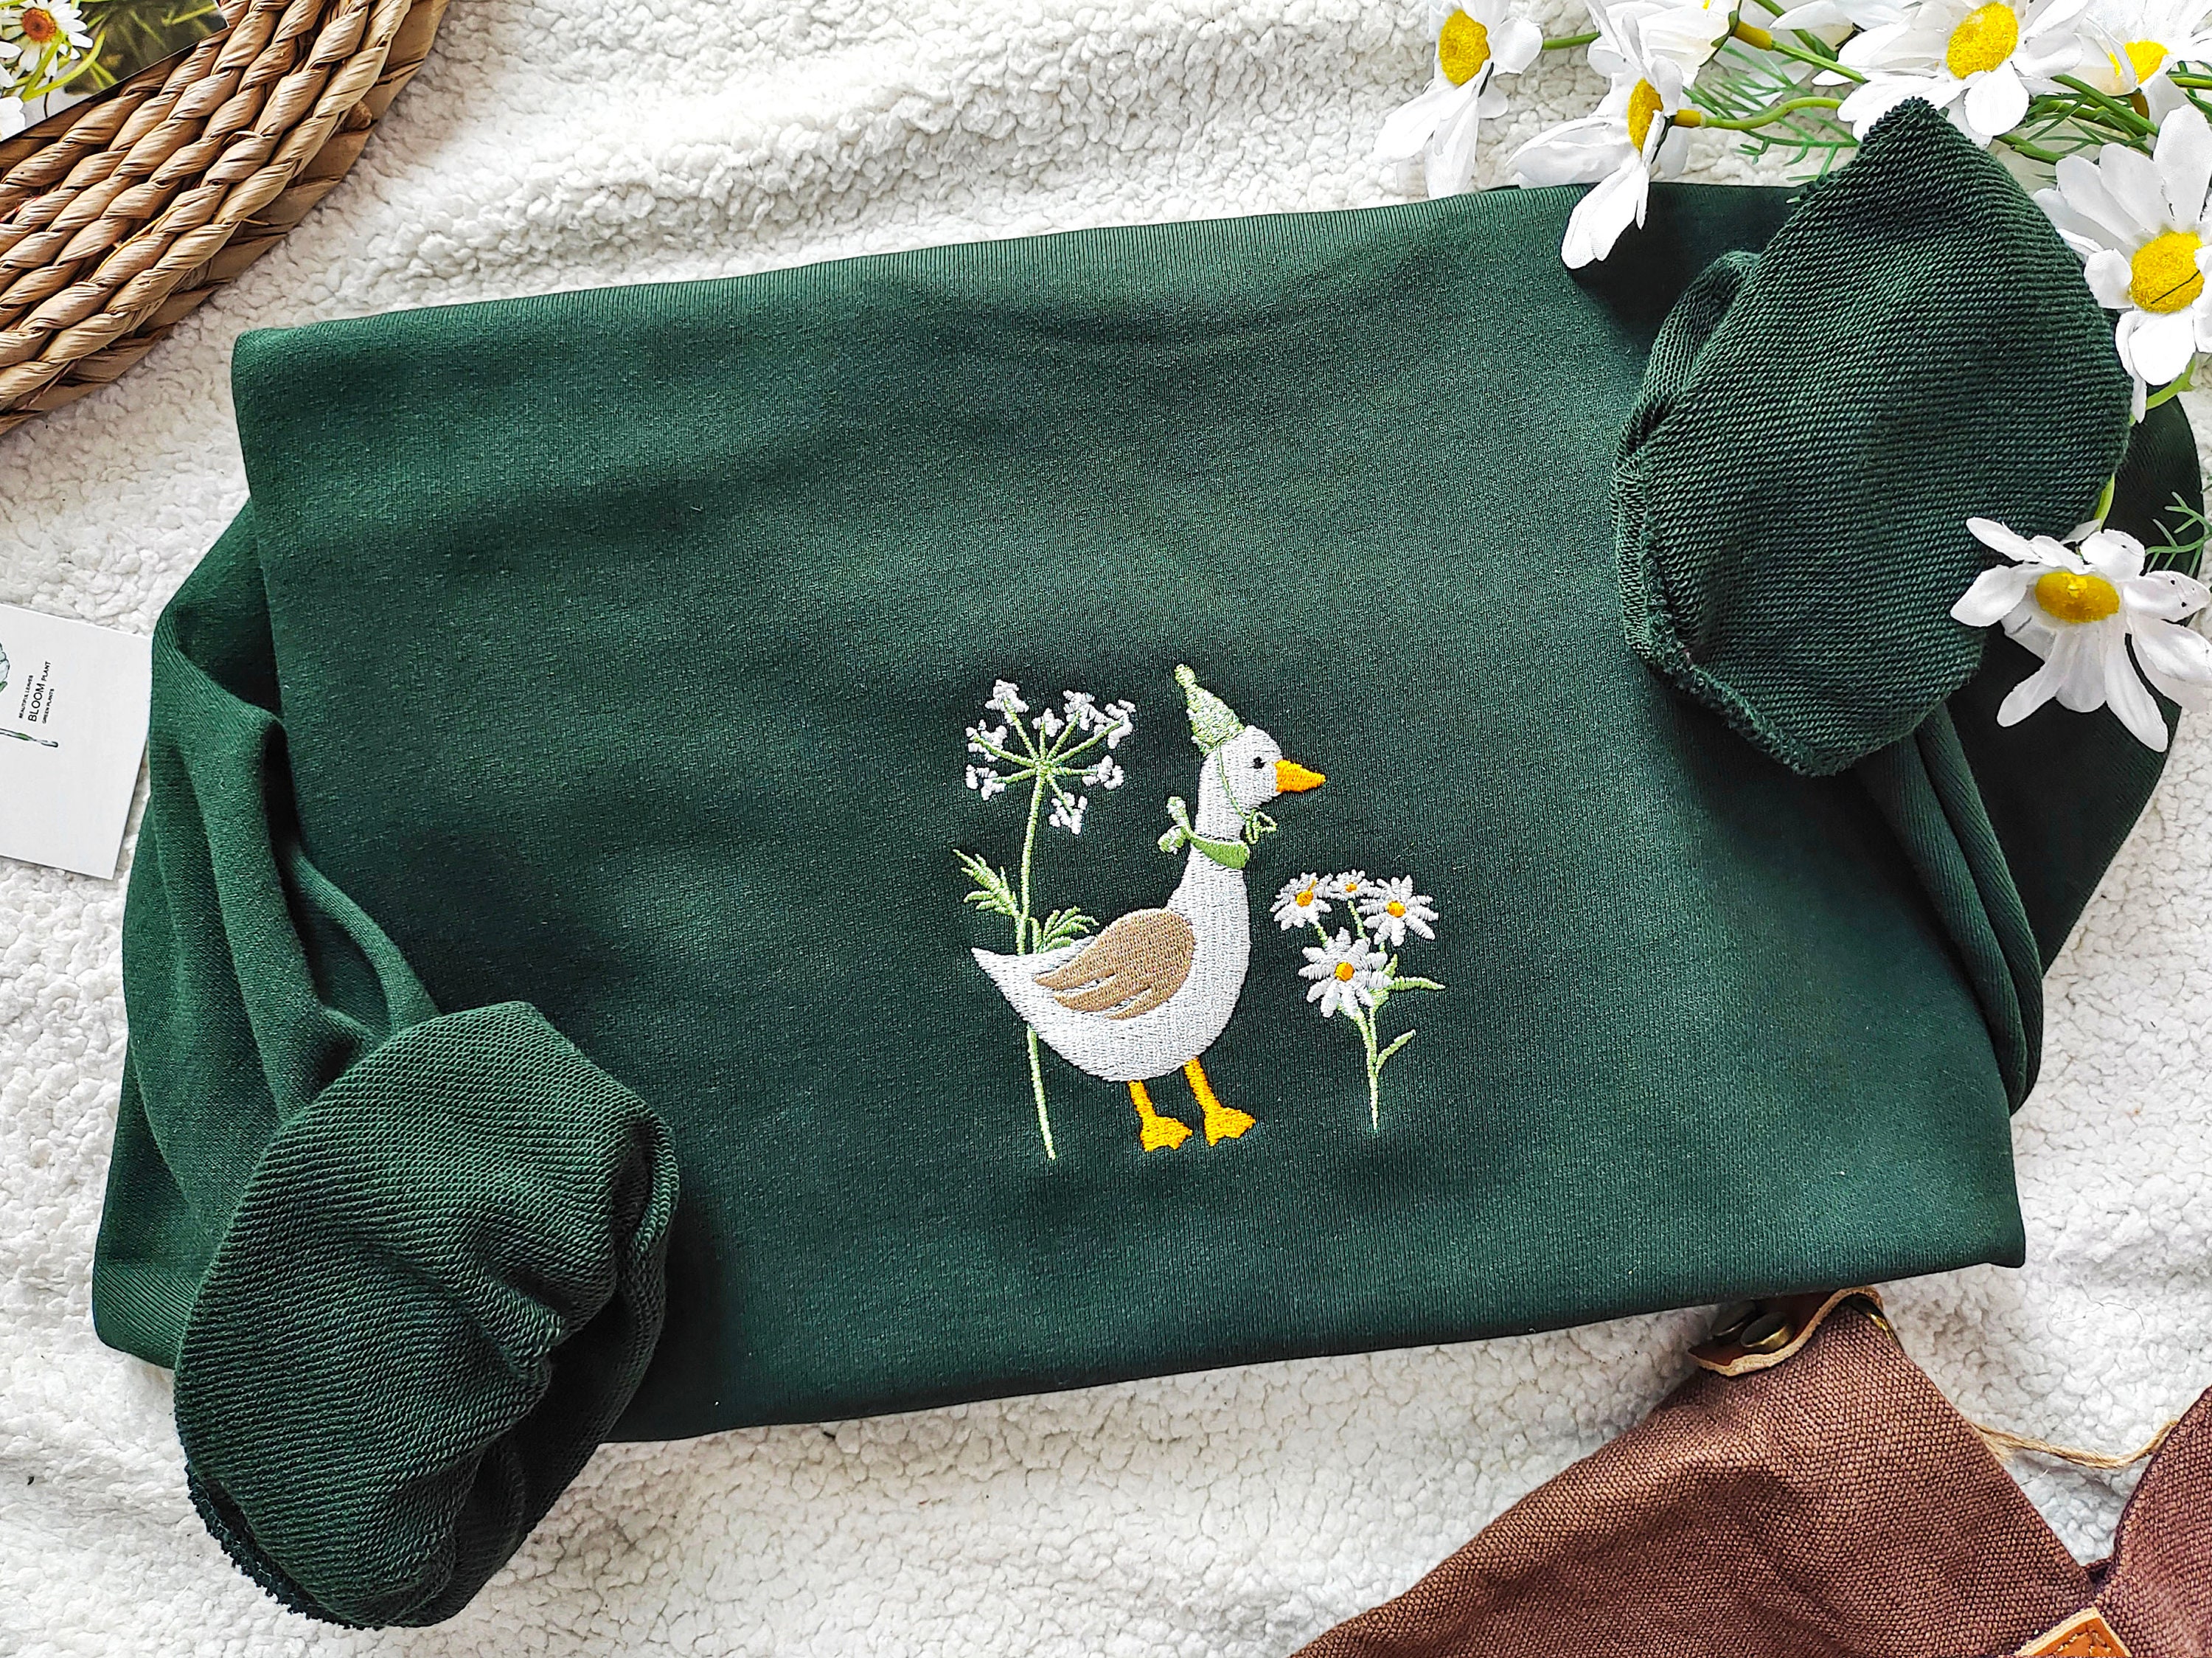 Discover Cute Embroidered Duck Sweatshirt,Goose and Daisy Embroidered Crewneck ,Funny Sweatshirt, Silly Goose,Animal Lover Gift